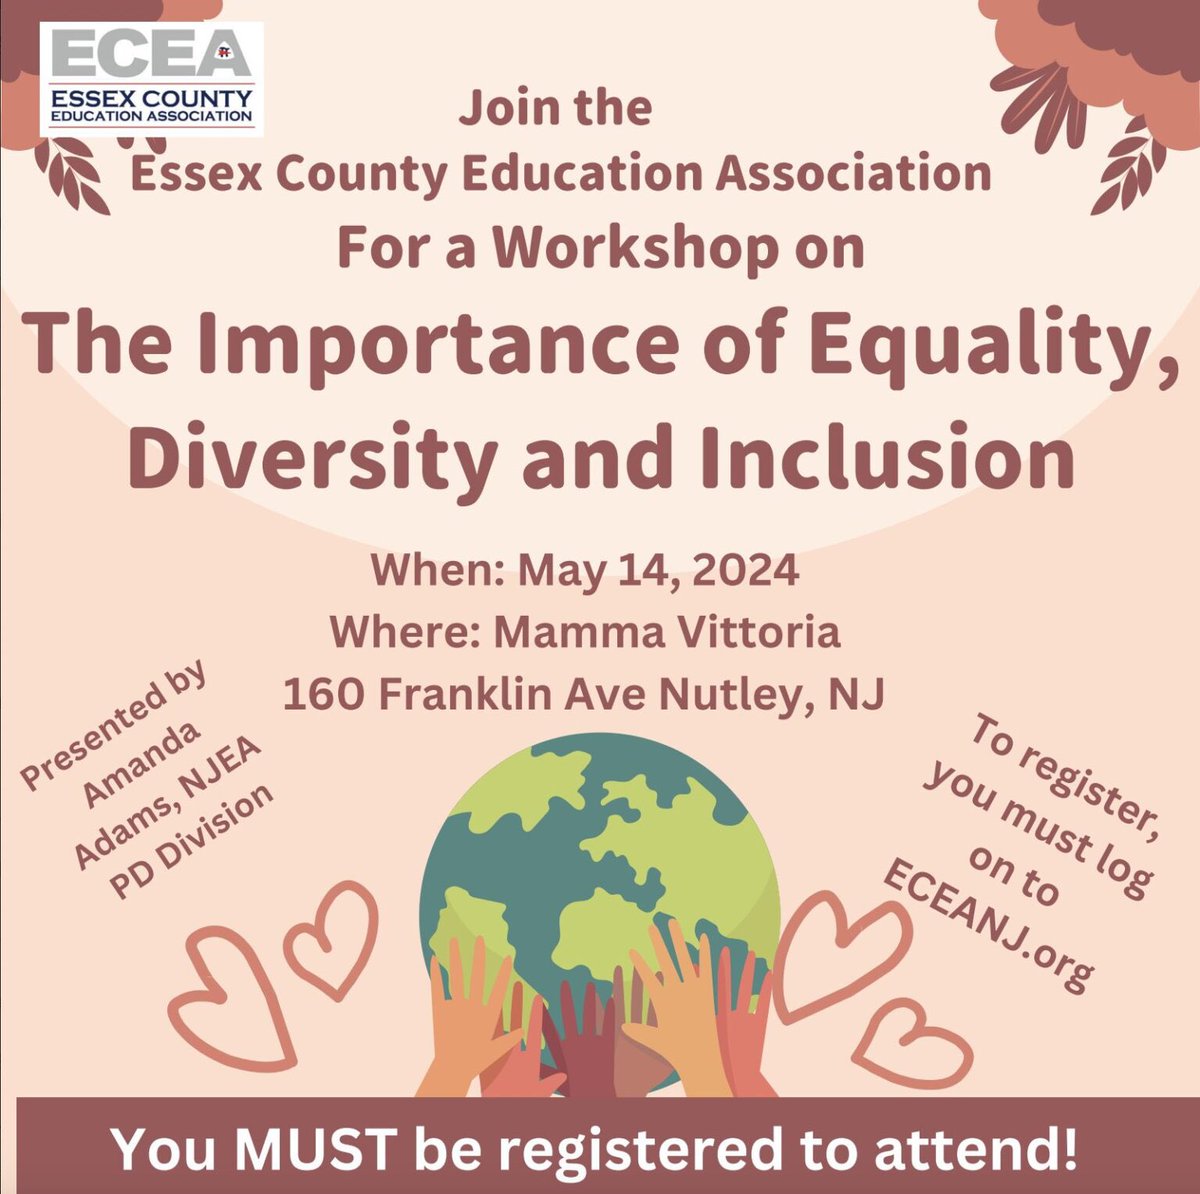 ‼️Registration is now open for a Workshop on The Importance of Equality, Diversity and Inclusion 🗓 Tuesday, May 14, 2024 ⏰ 4:30pm 📍Mamma Vittoria 🖥 Register at eceanj.org and click on the MEMBERS tab & log in with your NJEA credentials.